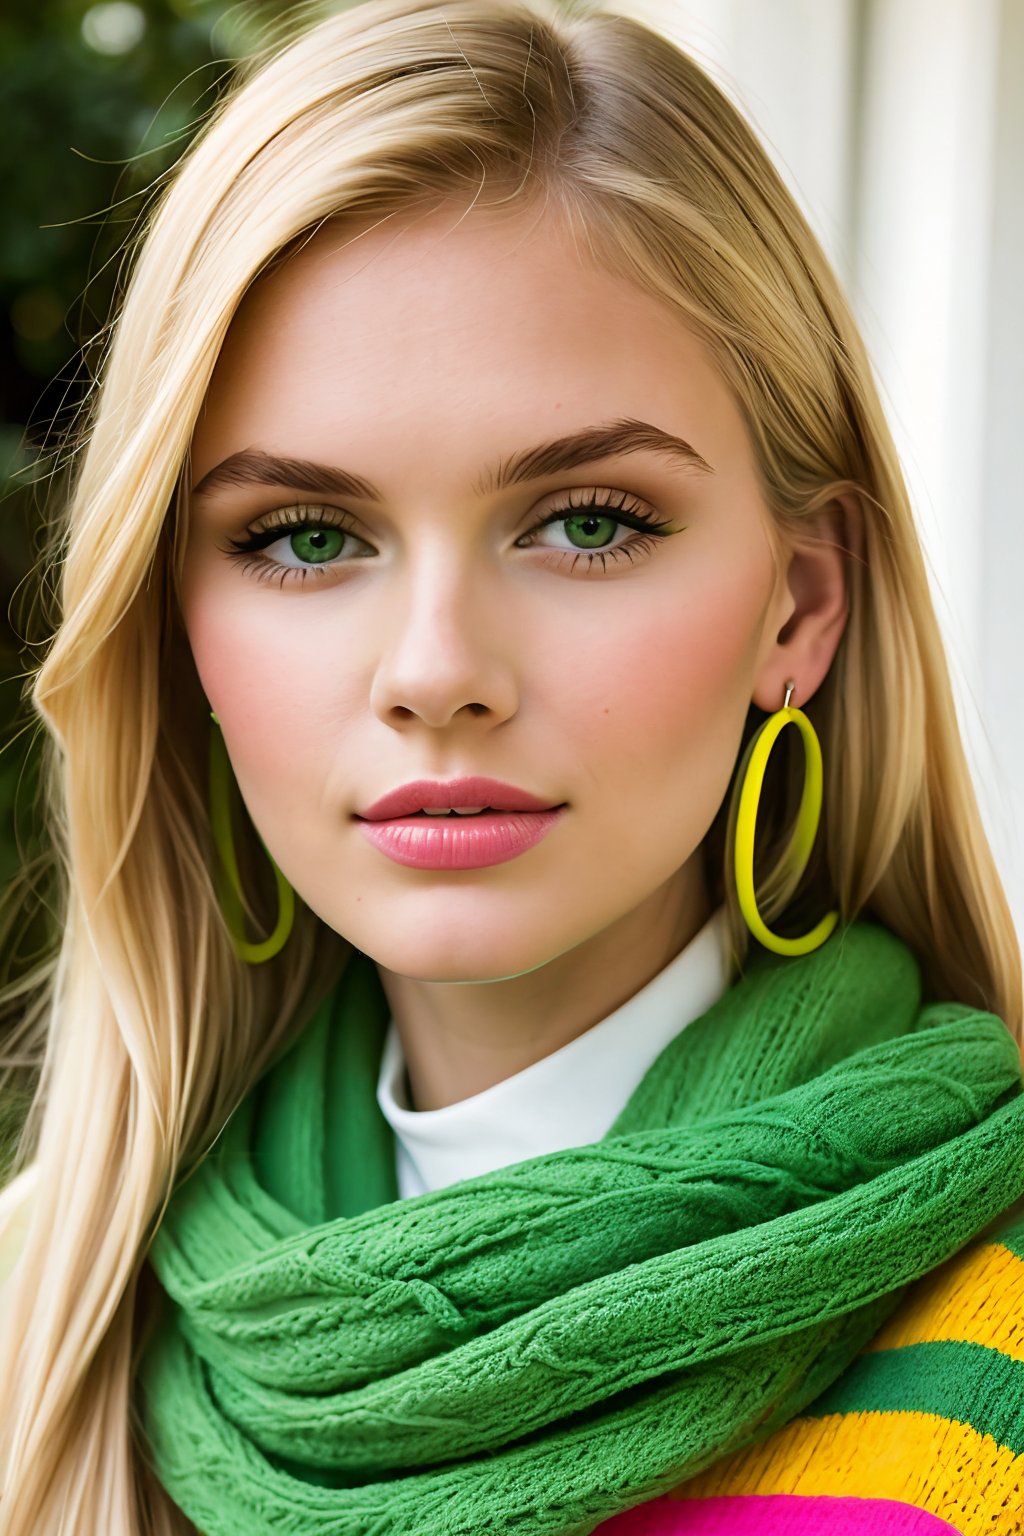 A pale young woman with long blonde hair and green make up, a green striped scarf, and playful kiwi earrings, looking directly at the camera, a portrait in the style of a 1960s fashion magazine, with bright colors, sharp focus, and a soft, natural light.